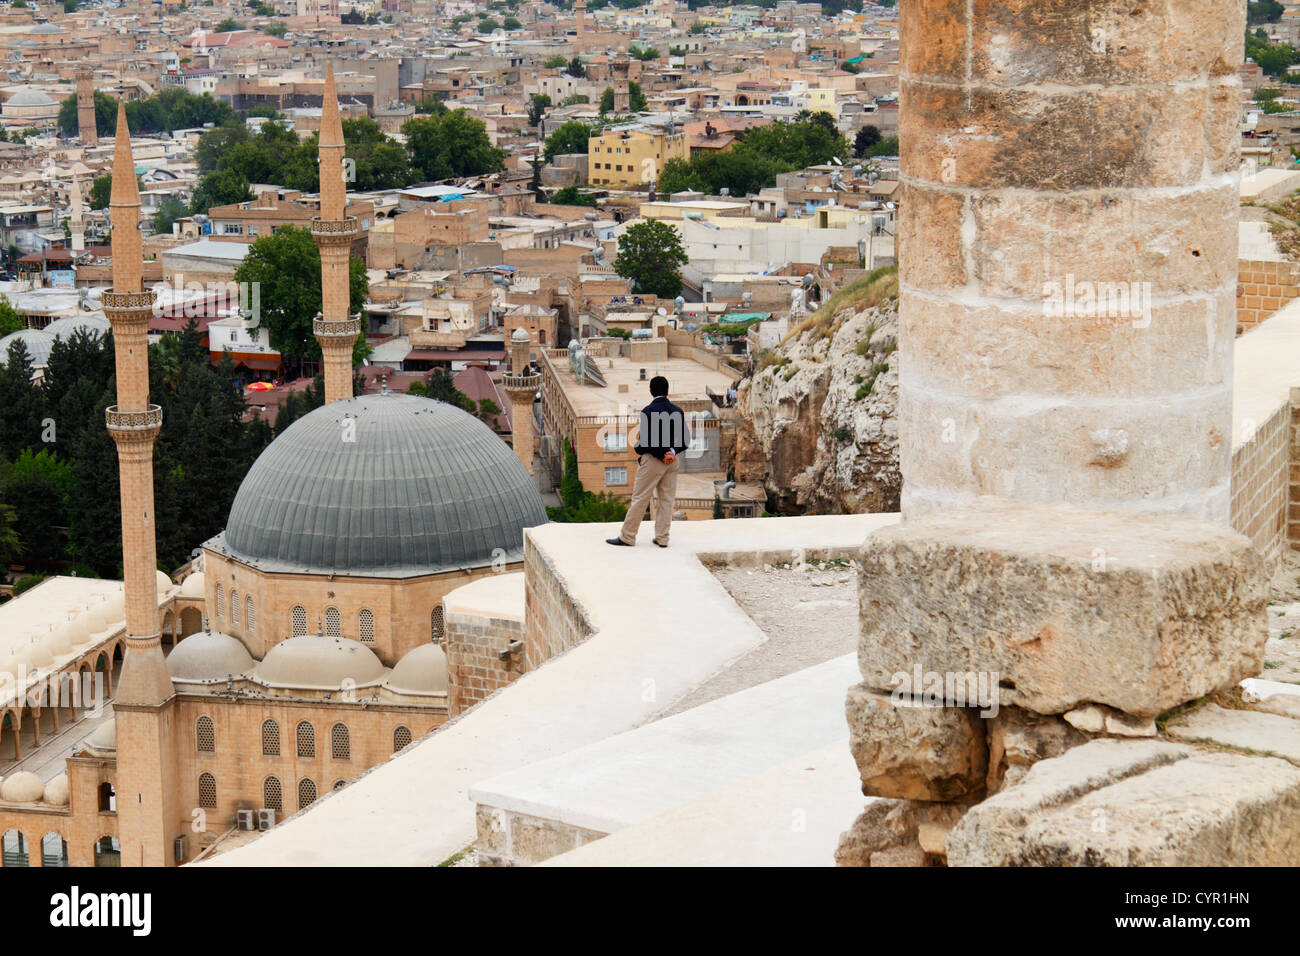 Overview of Urfa city and domes of Mevlid i Halil Camii mosque from the citadel with man staring at the horizon Stock Photo